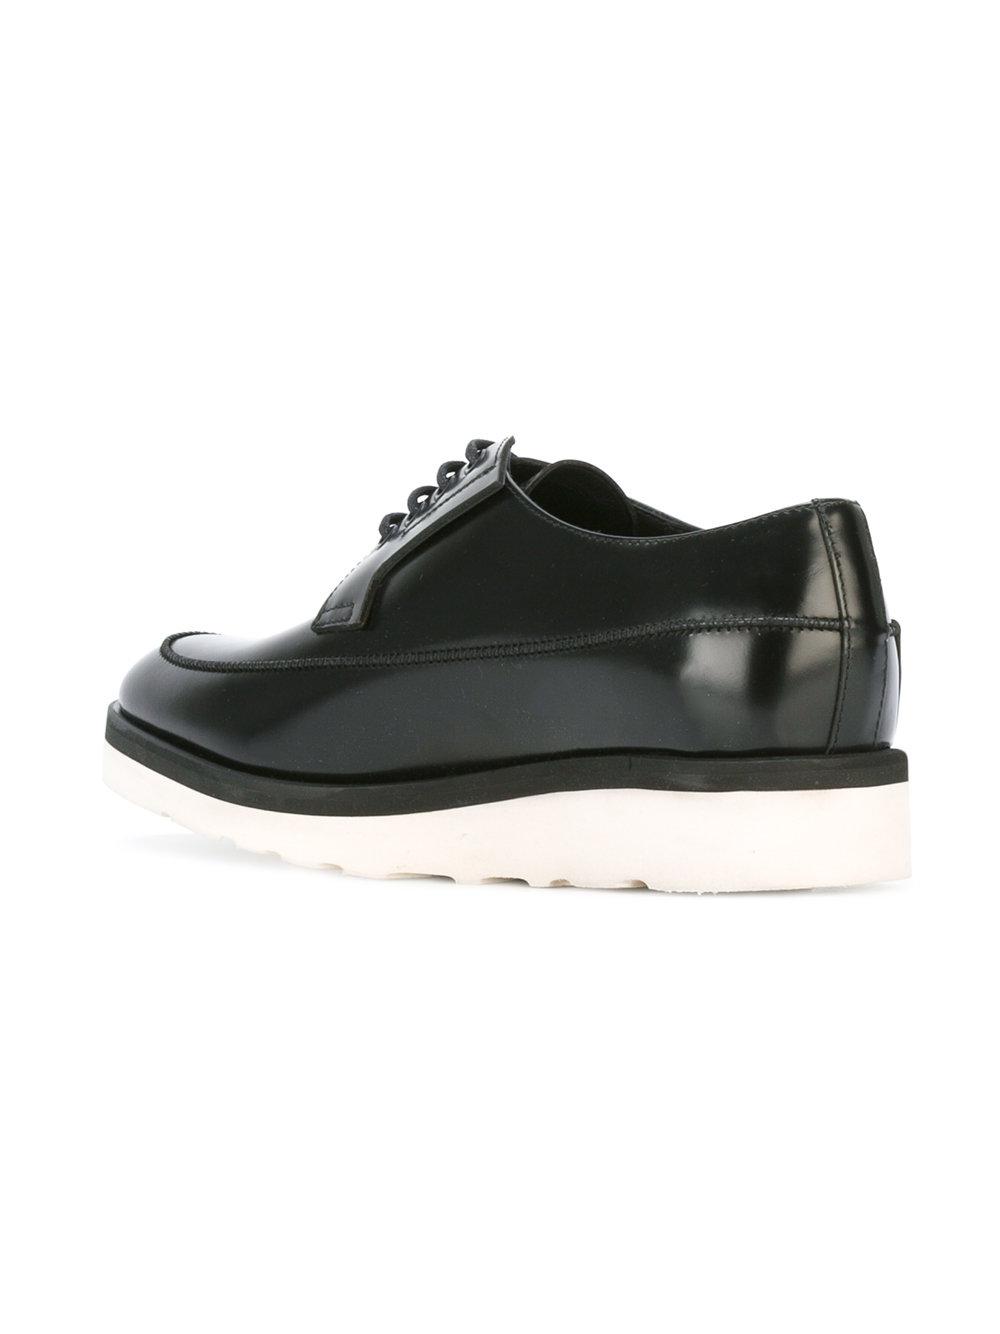 Lyst Oamc White Sole Oxford Shoes in Black for Men